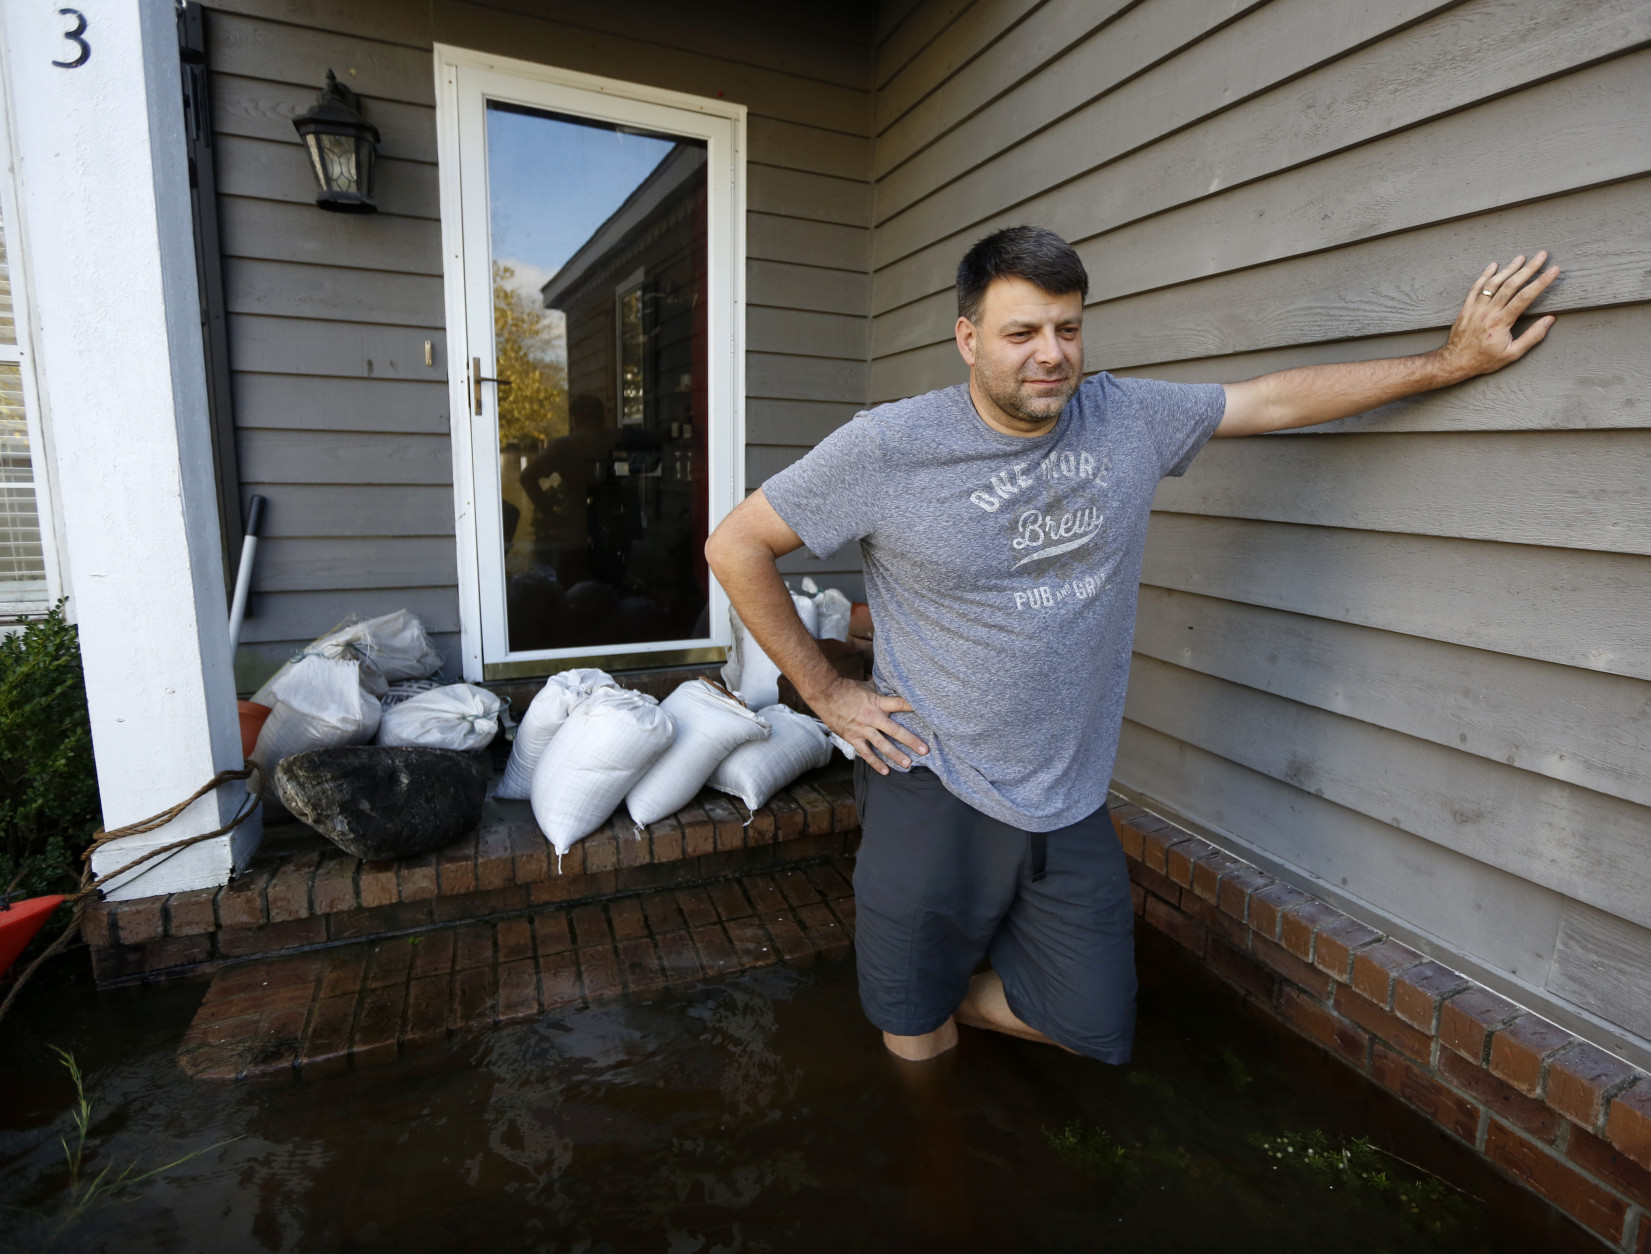 Jan-Patrick Gros looks out from his front porch of his home in the Ashborough subdivision near Summerville, S.C., Tuesday, Oct. 6, 2015. Residents are concerned that the Ashley river will continue to rise as floodwaters come down from Columbia. "I'm expecting another 2-3 feet", Gros said.  (AP Photo/Mic Smith)